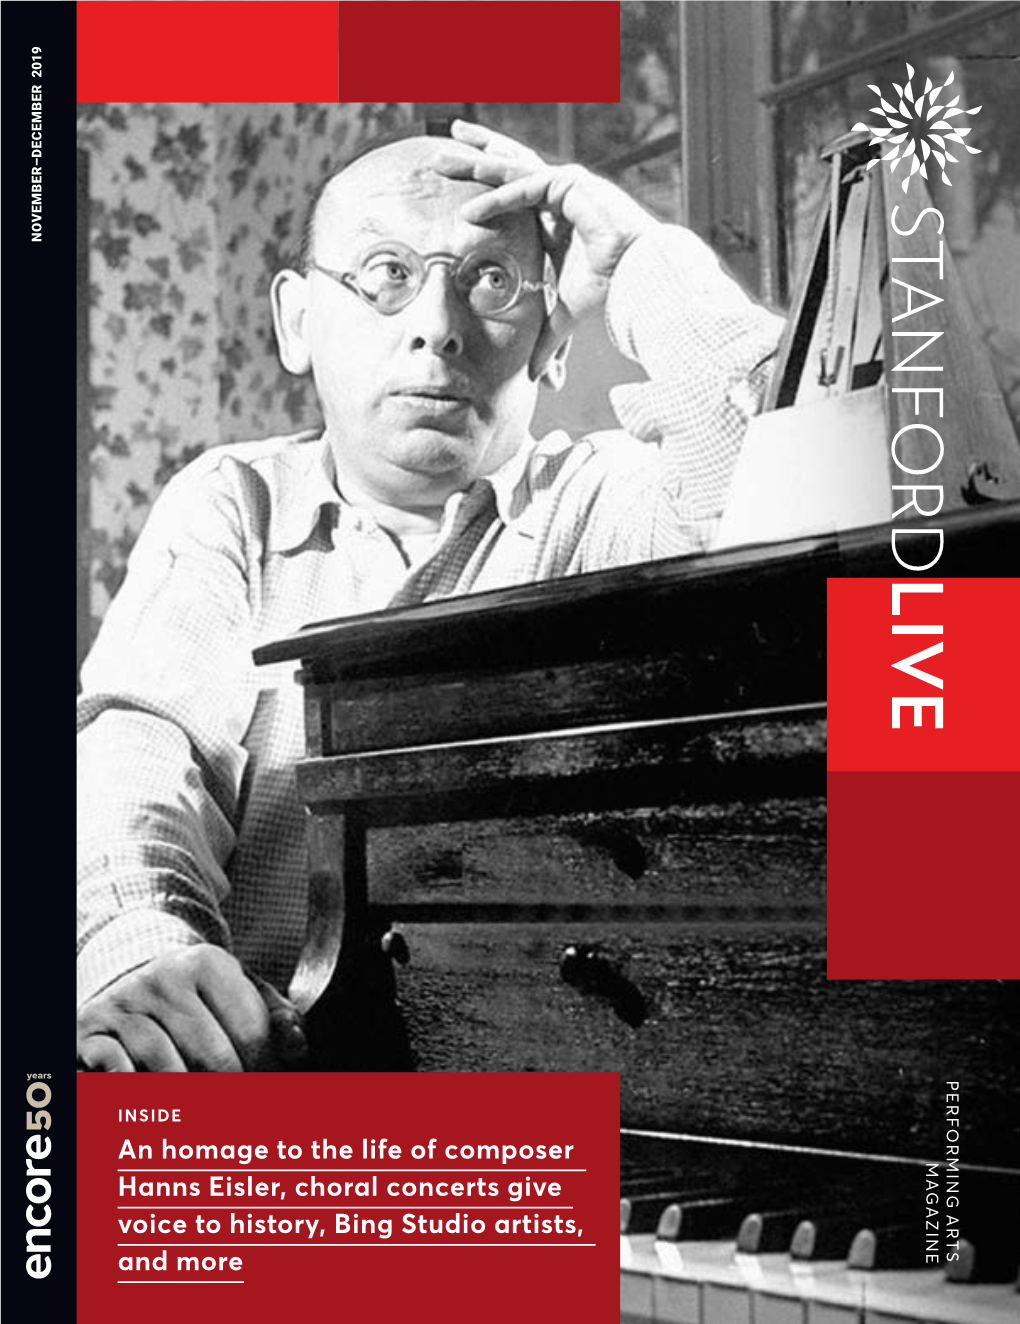 An Homage to the Life of Composer Hanns Eisler, Choral Concerts Give